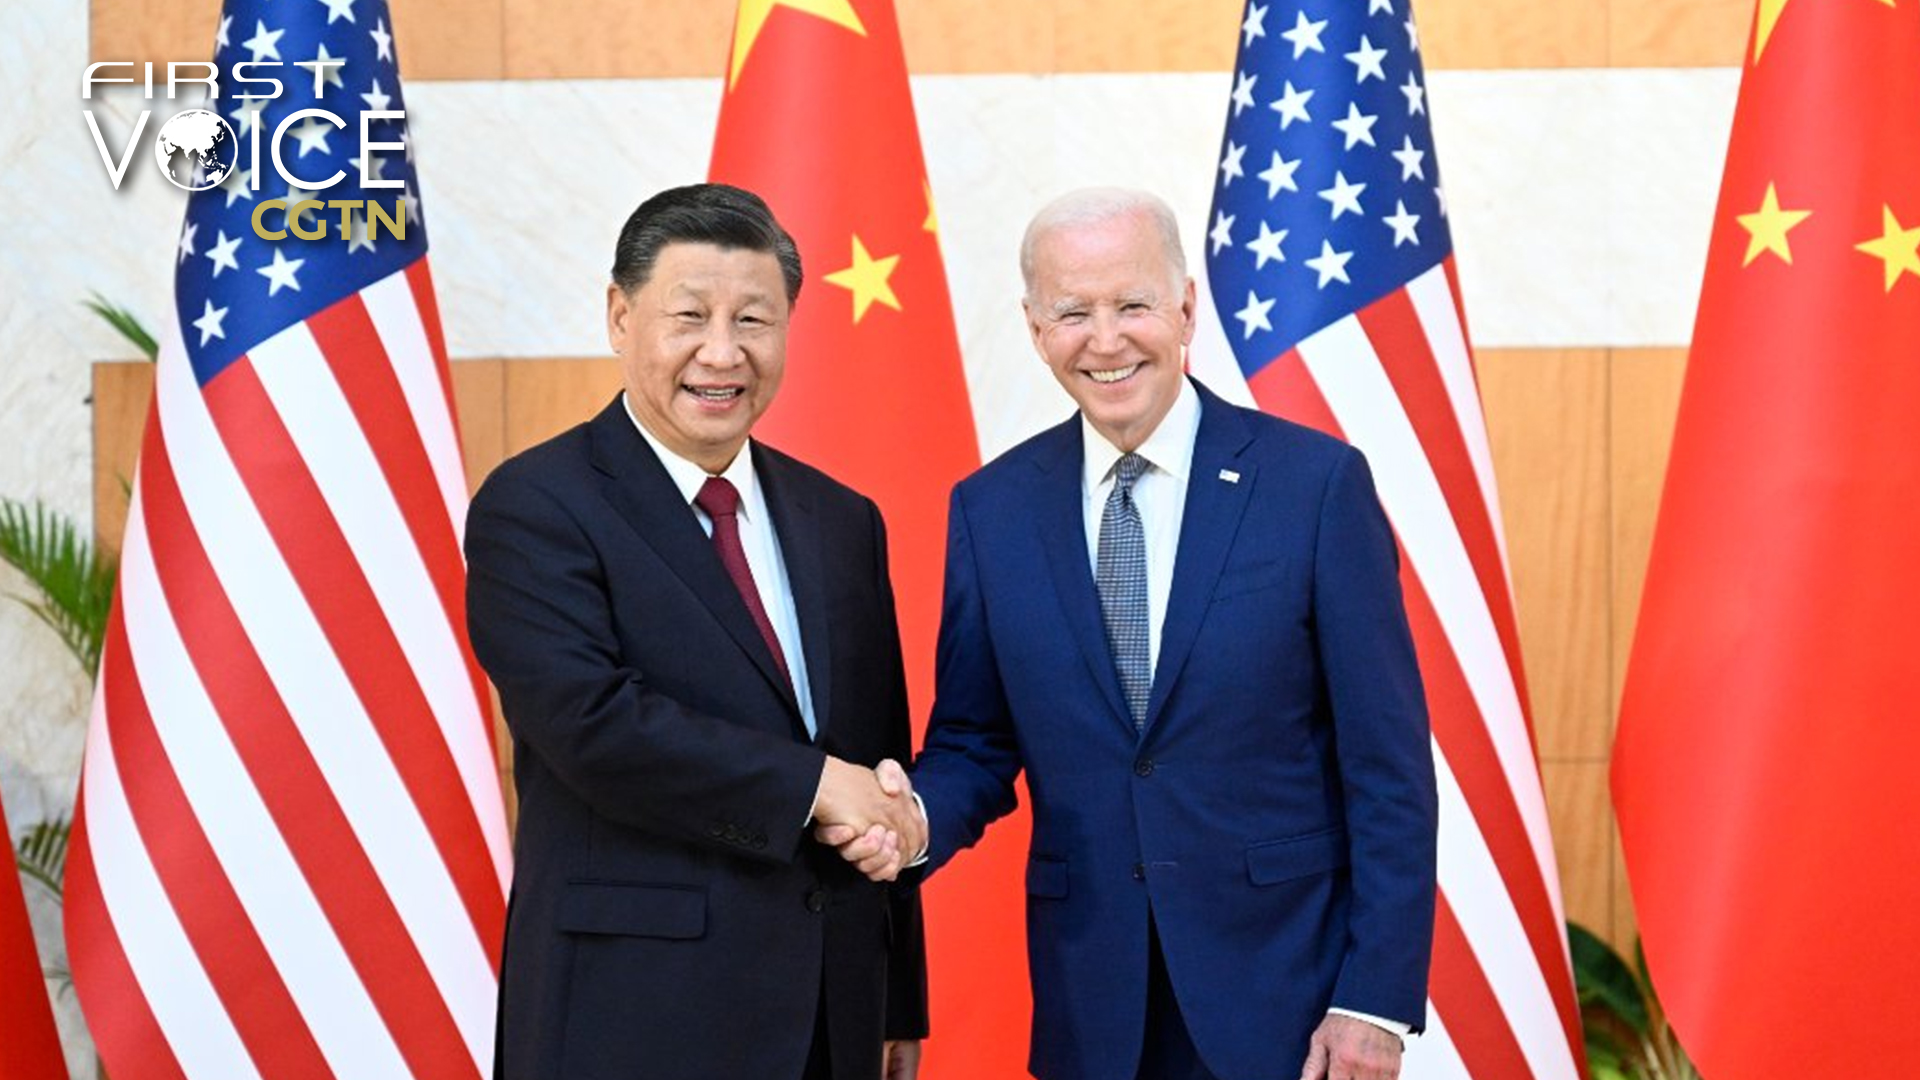 China, U.S. should bring relations back to the right track